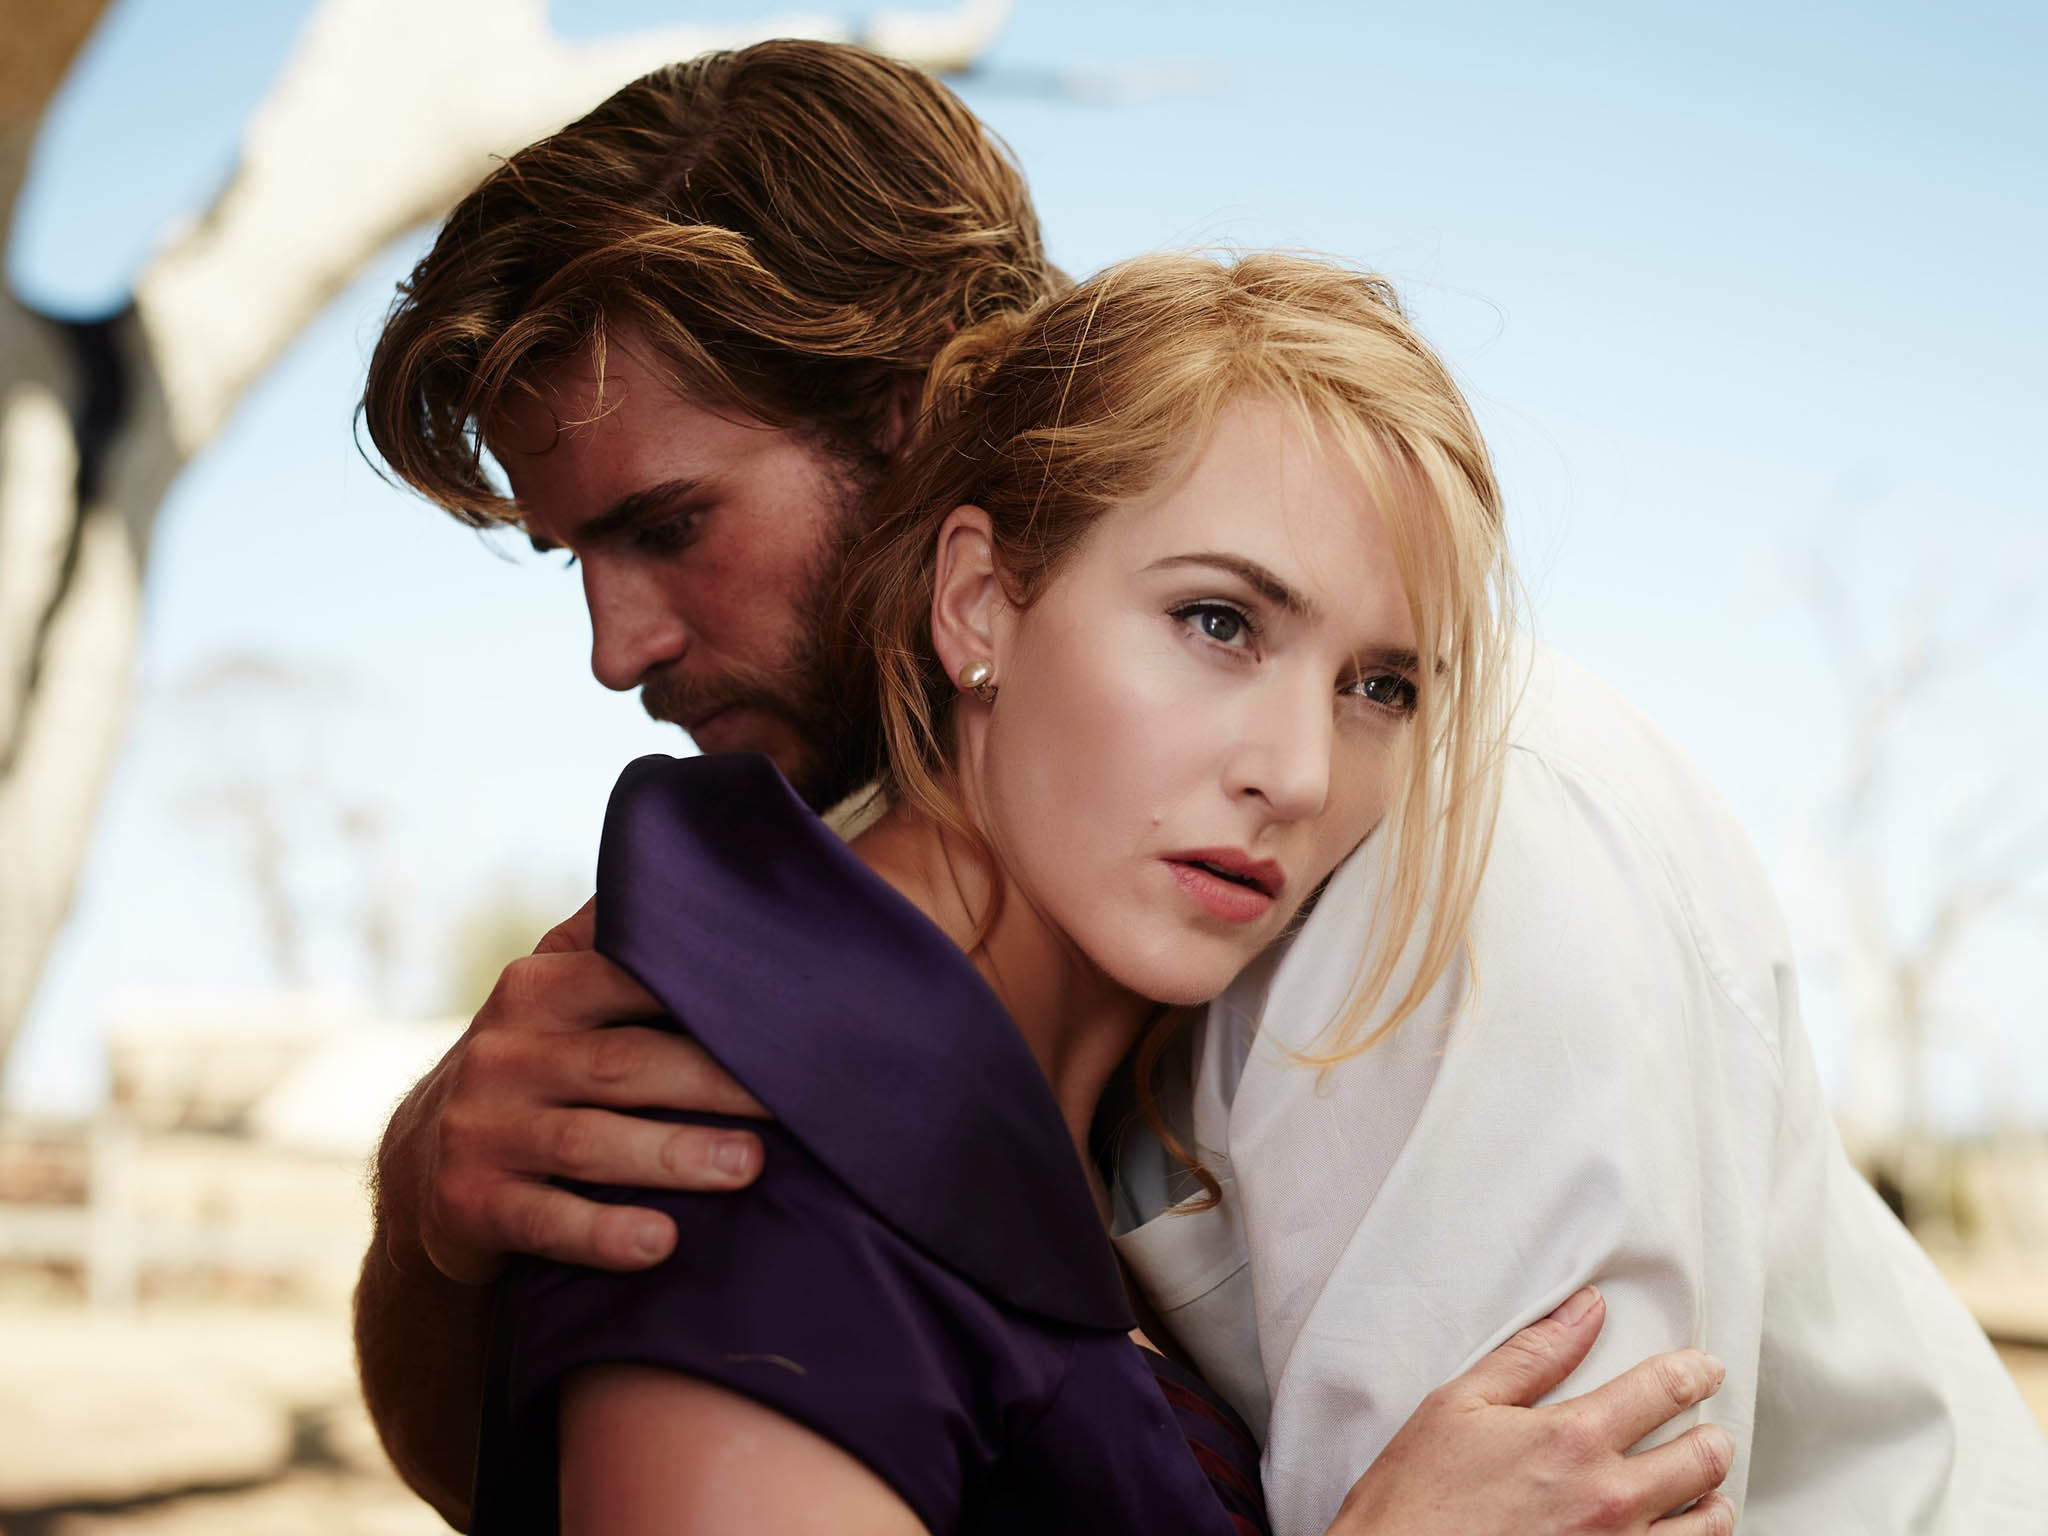 Liam Hemsworth and Kate Winslet in a scene from the new film, The Dressmaker